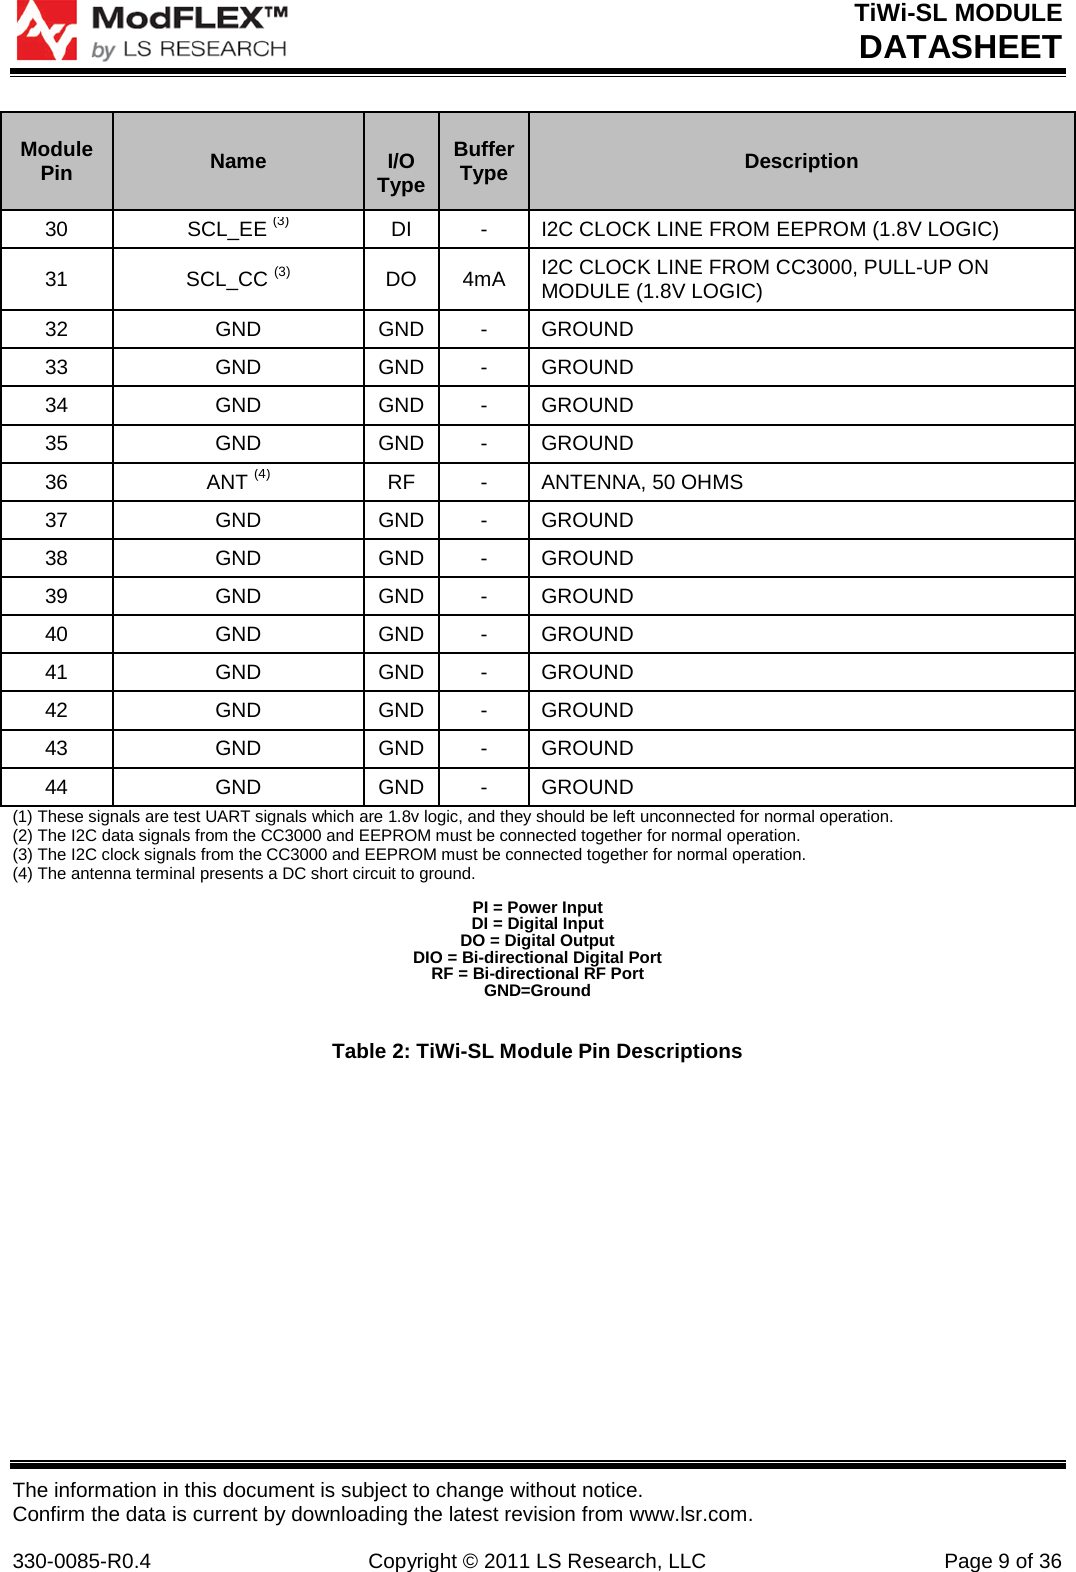 TiWi-SL MODULE DATASHEET The information in this document is subject to change without notice. Confirm the data is current by downloading the latest revision from www.lsr.com.  330-0085-R0.4 Copyright © 2011 LS Research, LLC Page 9 of 36 Module Pin Name  I/O Type Buffer Type Description  30 SCL_EE (3) DI - I2C CLOCK LINE FROM EEPROM (1.8V LOGIC) 31 SCL_CC (3) DO 4mA I2C CLOCK LINE FROM CC3000, PULL-UP ON MODULE (1.8V LOGIC) 32 GND GND - GROUND 33 GND GND - GROUND 34 GND GND - GROUND 35 GND GND - GROUND 36 ANT (4) RF - ANTENNA, 50 OHMS  37 GND GND - GROUND 38 GND GND - GROUND 39 GND GND - GROUND 40 GND GND - GROUND 41 GND GND - GROUND 42 GND GND - GROUND 43 GND GND - GROUND 44 GND GND - GROUND (1) These signals are test UART signals which are 1.8v logic, and they should be left unconnected for normal operation. (2) The I2C data signals from the CC3000 and EEPROM must be connected together for normal operation.  (3) The I2C clock signals from the CC3000 and EEPROM must be connected together for normal operation. (4) The antenna terminal presents a DC short circuit to ground.  PI = Power Input DI = Digital Input  DO = Digital Output DIO = Bi-directional Digital Port RF = Bi-directional RF Port GND=Ground   Table 2: TiWi-SL Module Pin Descriptions  